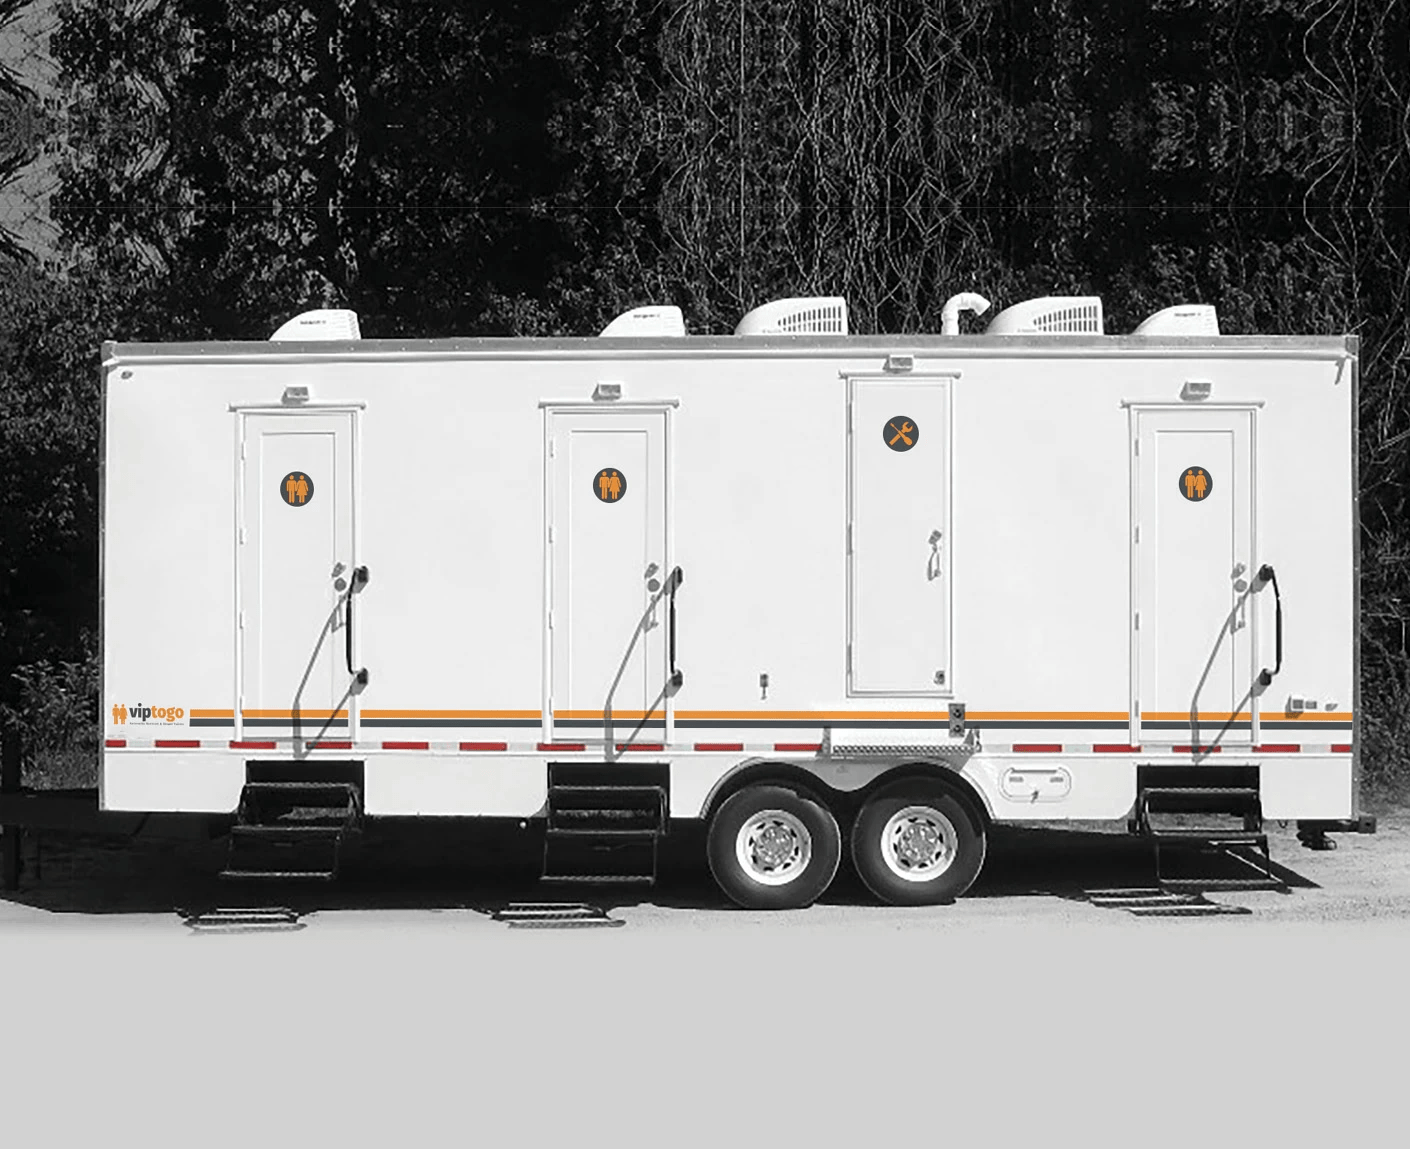 portable shower and restrooms parked at an outdoor spot